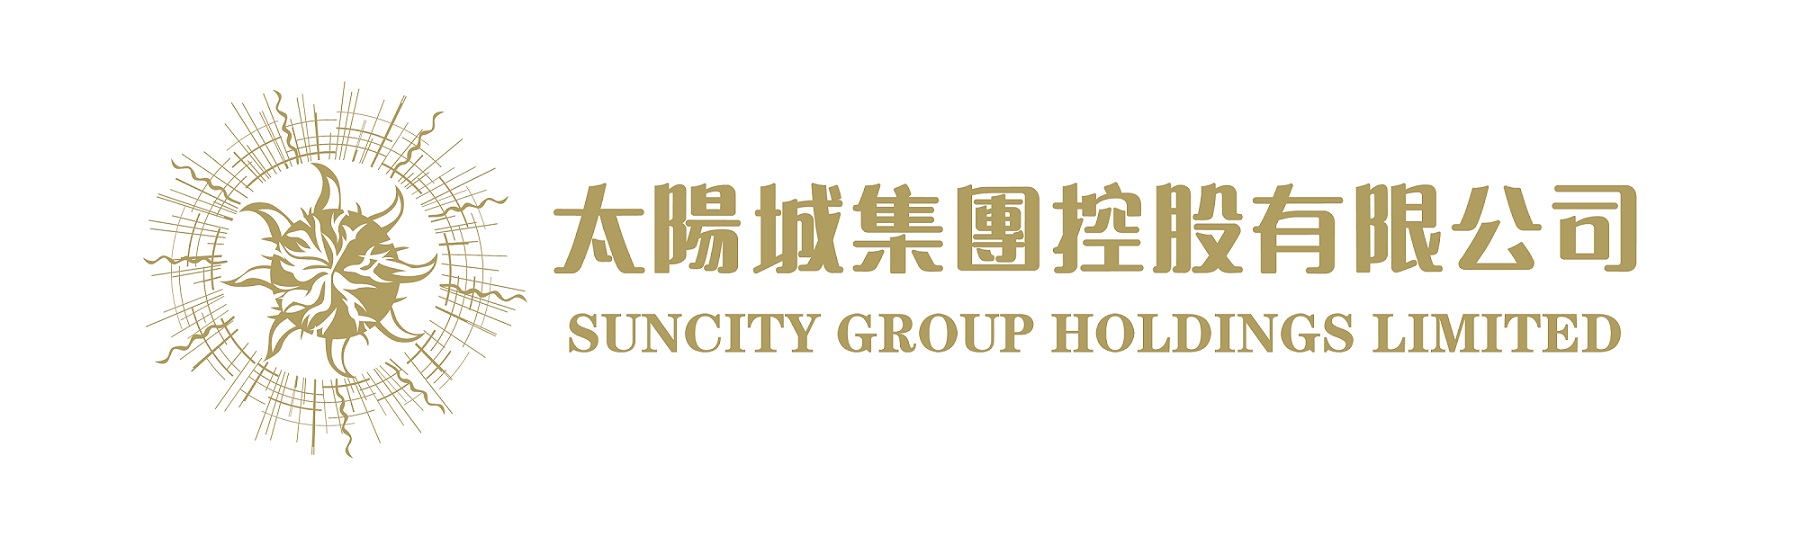 Suncity Group Holdings Limited Reports Annual 2020 Results